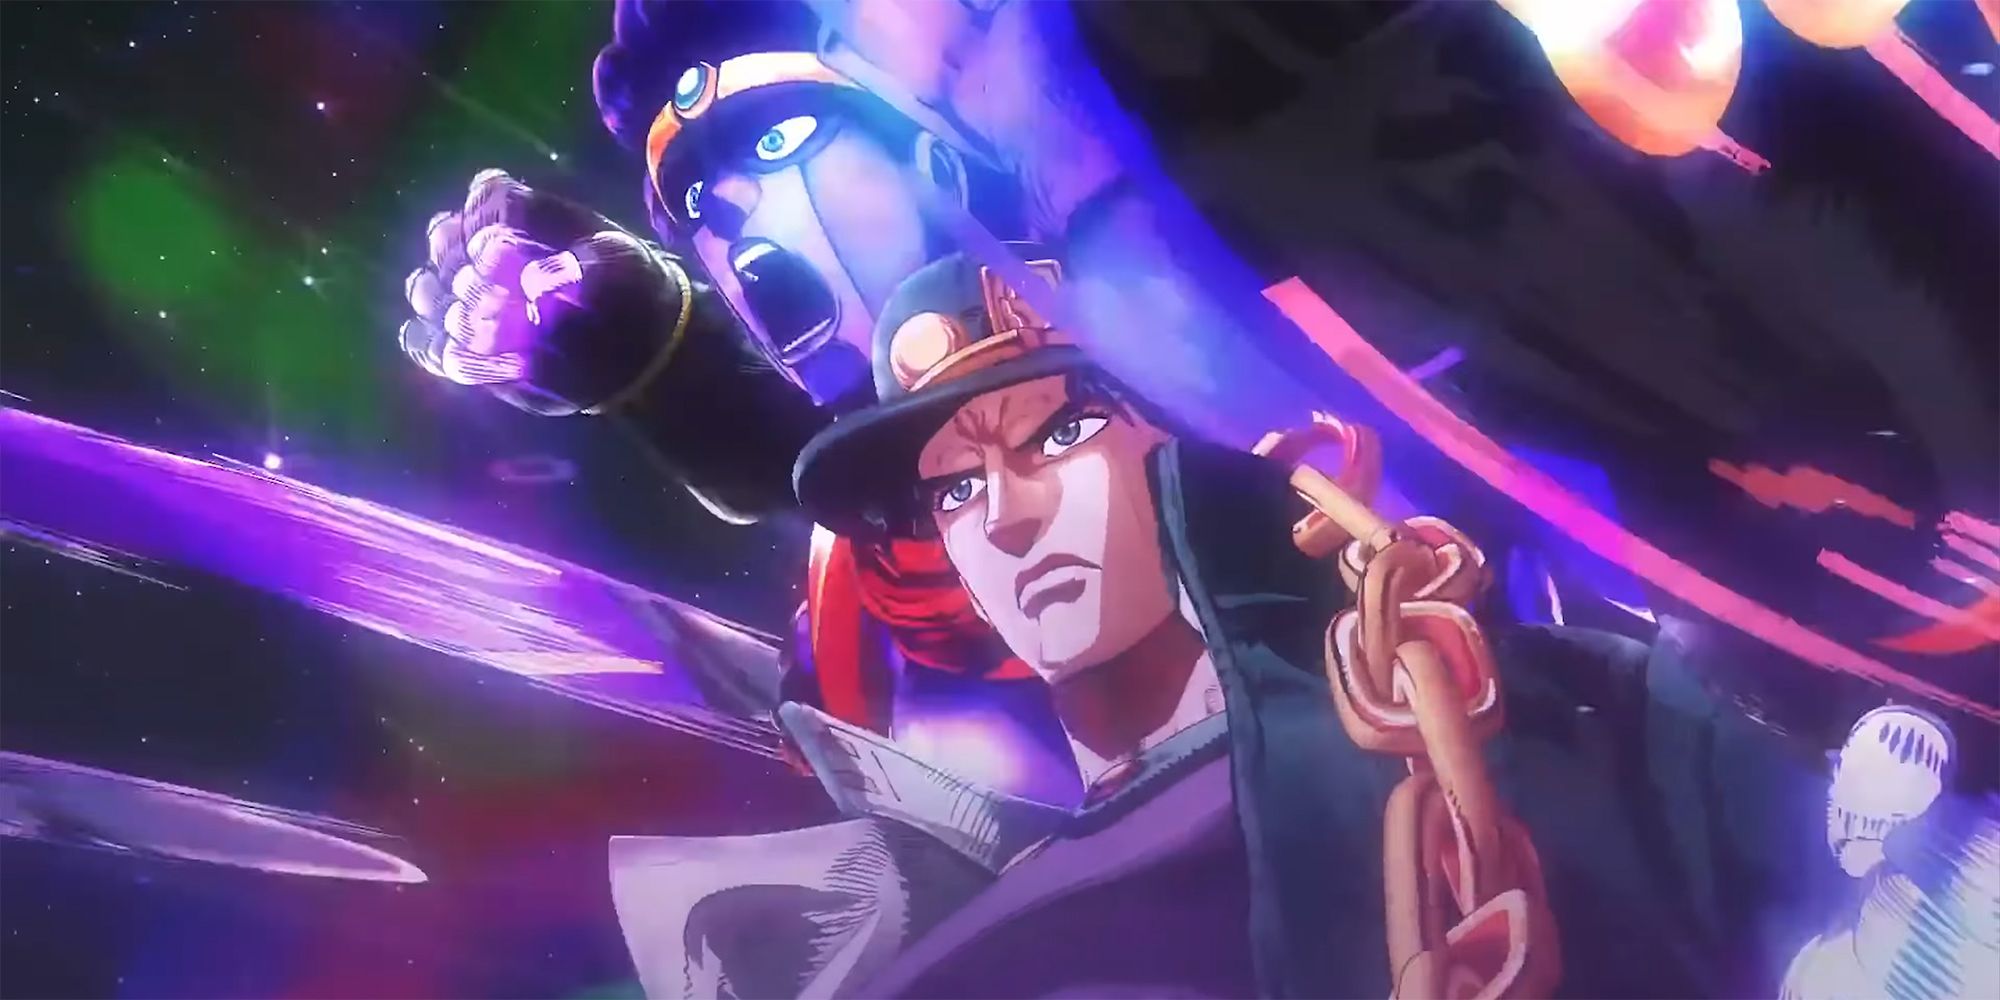 Jojo's Bizarre Adventure - Still Frame From Part 3 Stardust Crusaders OP Of Jotaro Using Star Platinum To Punch The Literal Fourth Wall